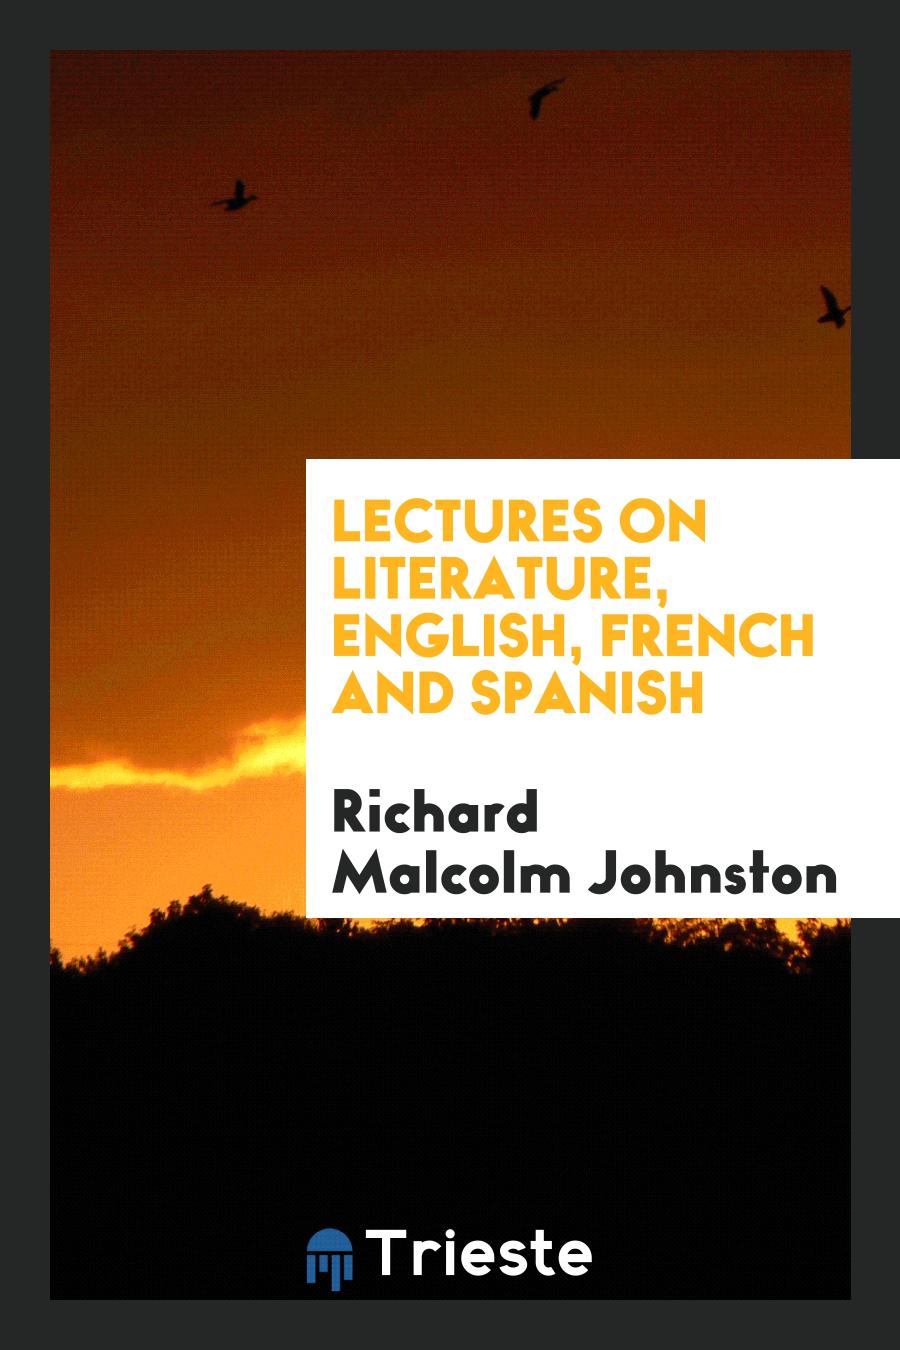 Lectures on literature, English, French and Spanish